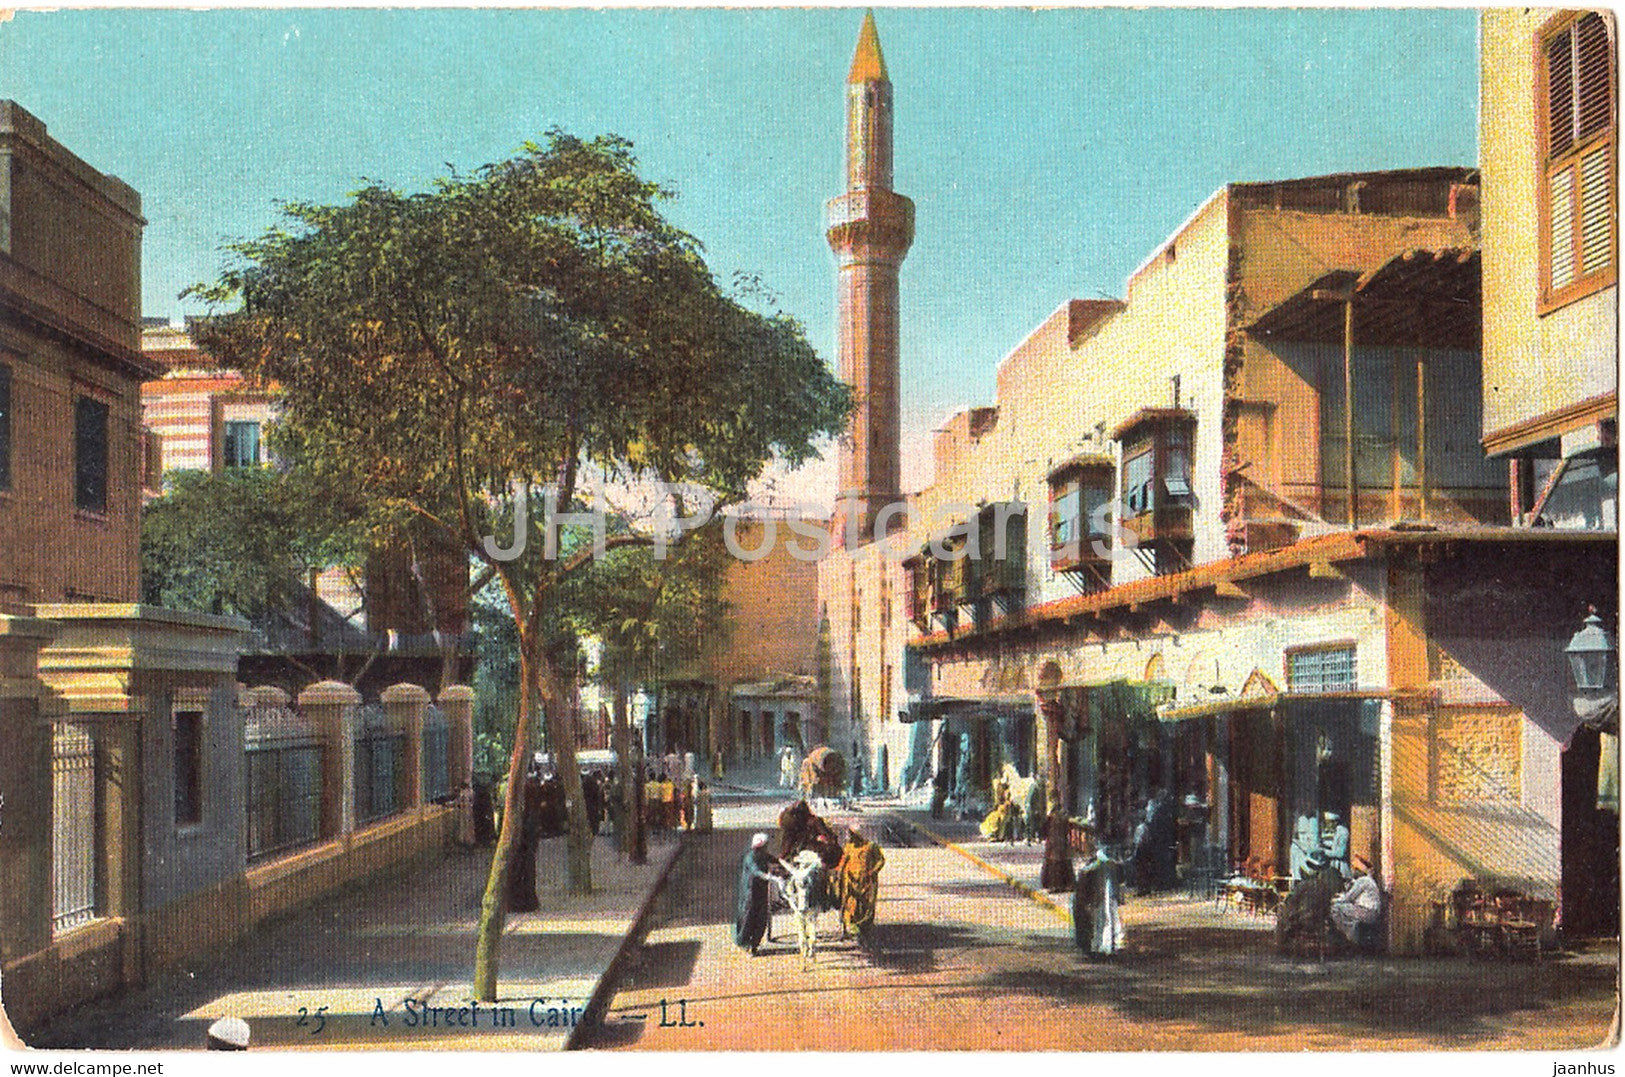 A Street in Cairo - Le Caire - Un Rue au Caire - LL - 25 - old postcard - Egypt - unused - JH Postcards